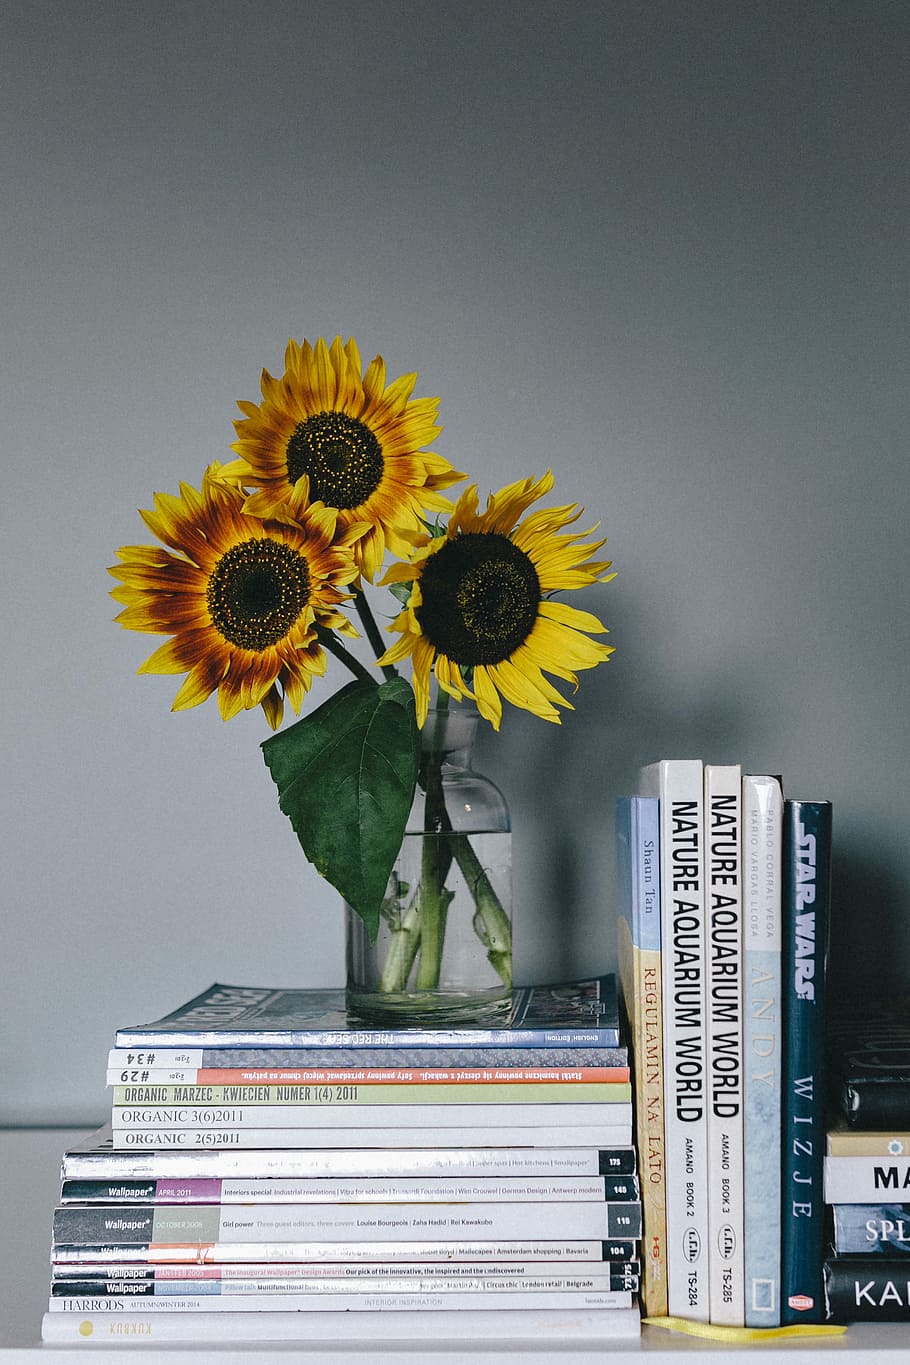 HD wallpaper: Sunflowers and books, magazines, indoor, business, stack, vase